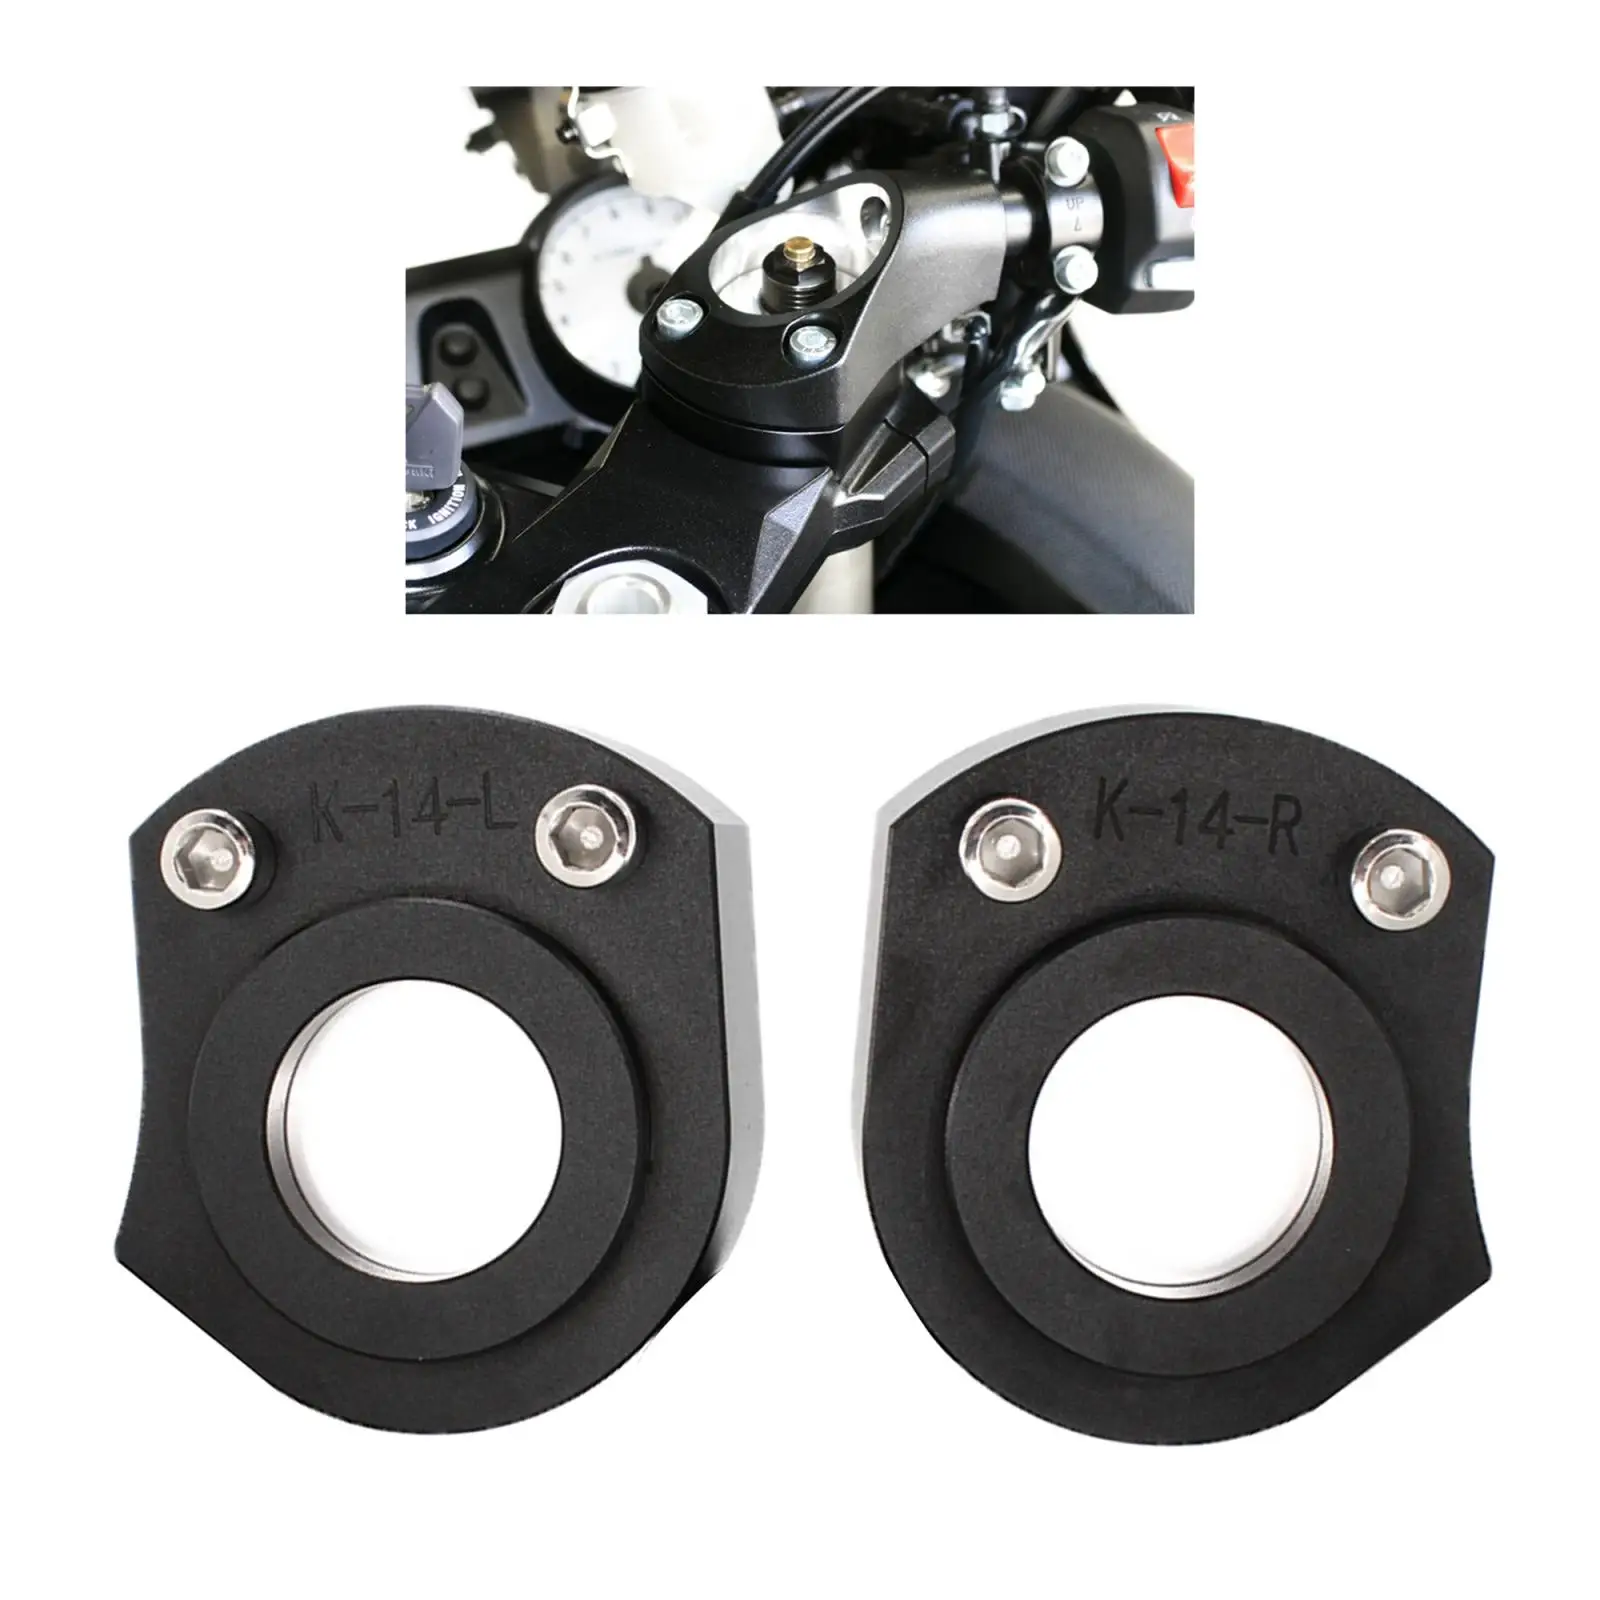 

Handlebar Riser Spacer Kit For Kawasaki ZX-14R ZX14R ZZR 1400 2006-2018 Handle Bar Mount Clamp Height up